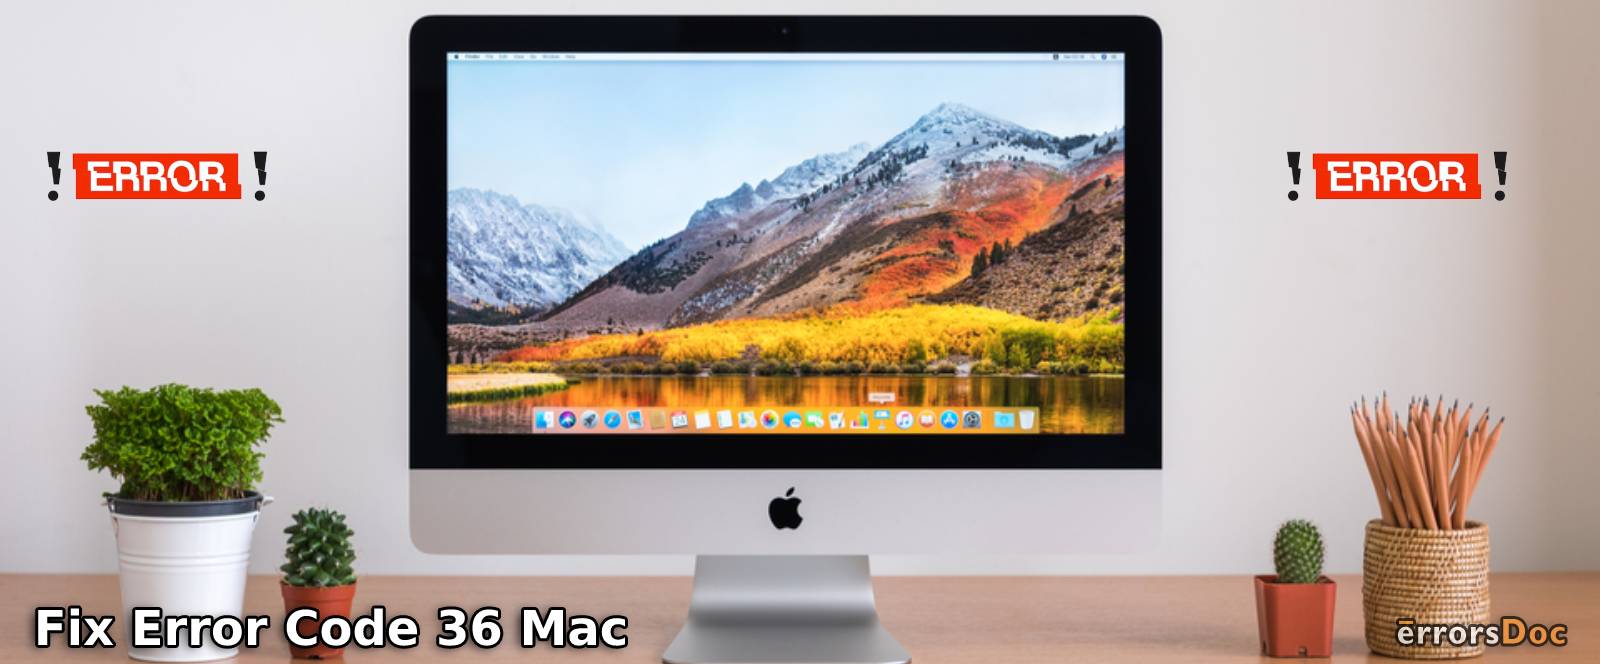 Error Code 36 Mac: What Does it Mean and How can You Troubleshoot it?